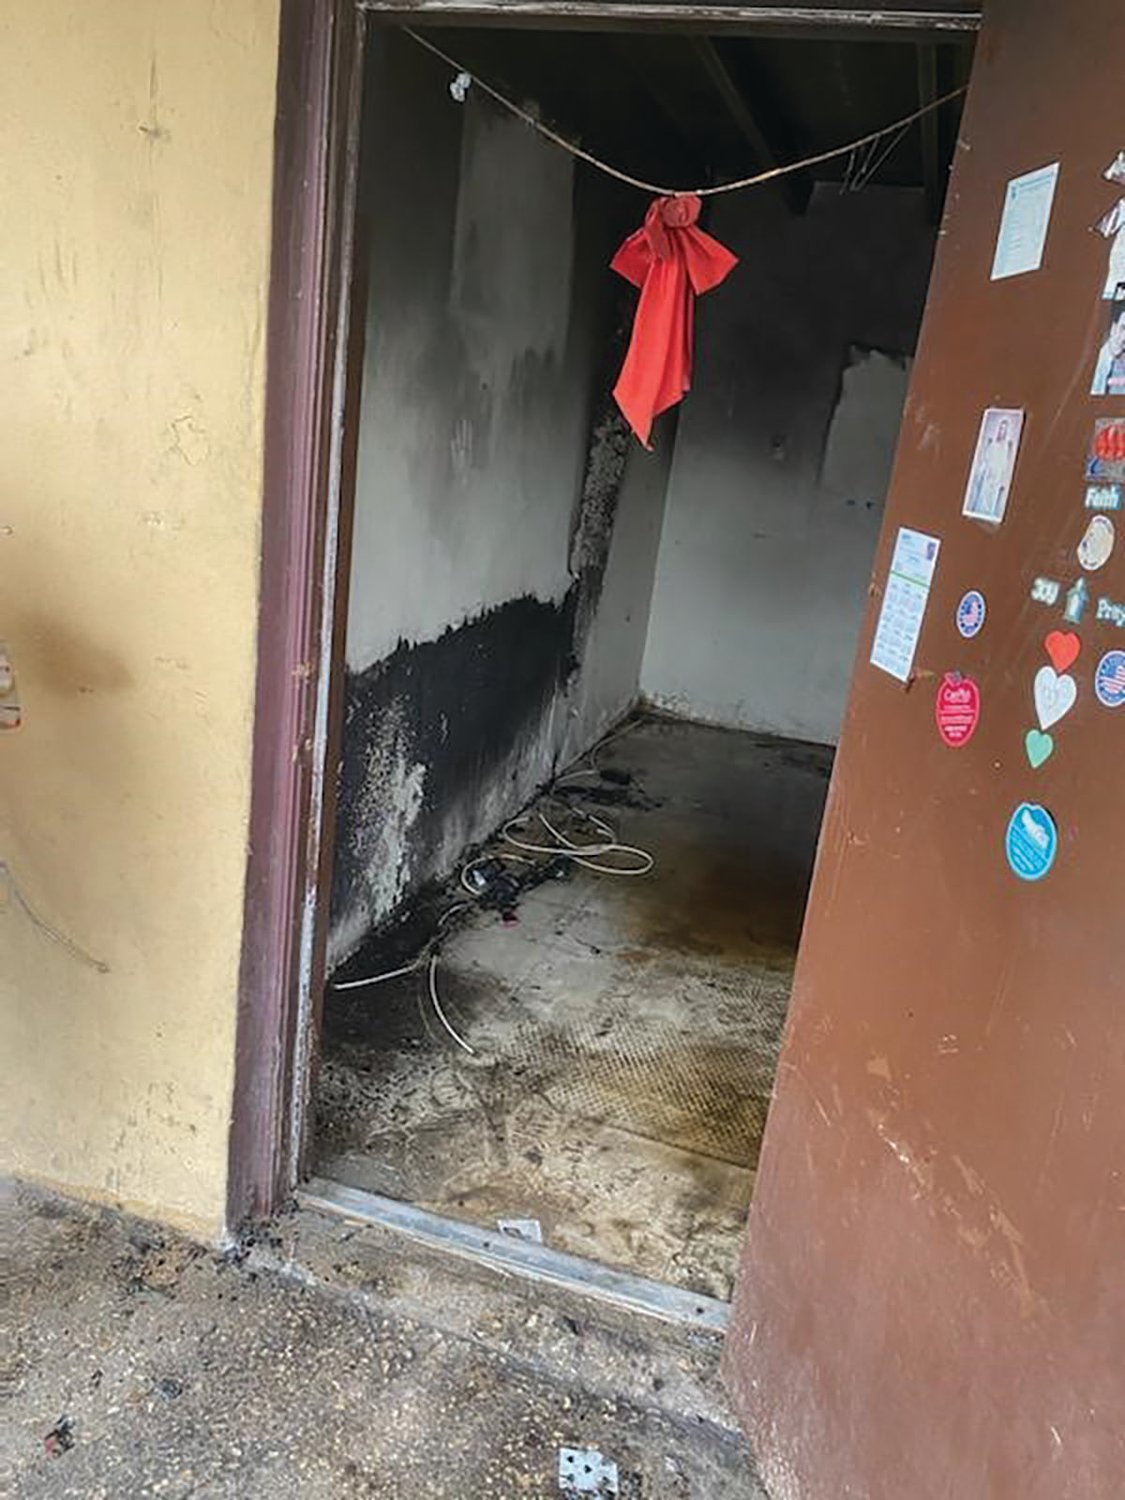 BELLE GLADE — American Red Cross assisted three people affected by a fire that broke out in a home on Southwest Sixth Street on Tuesday, Nov. 10.